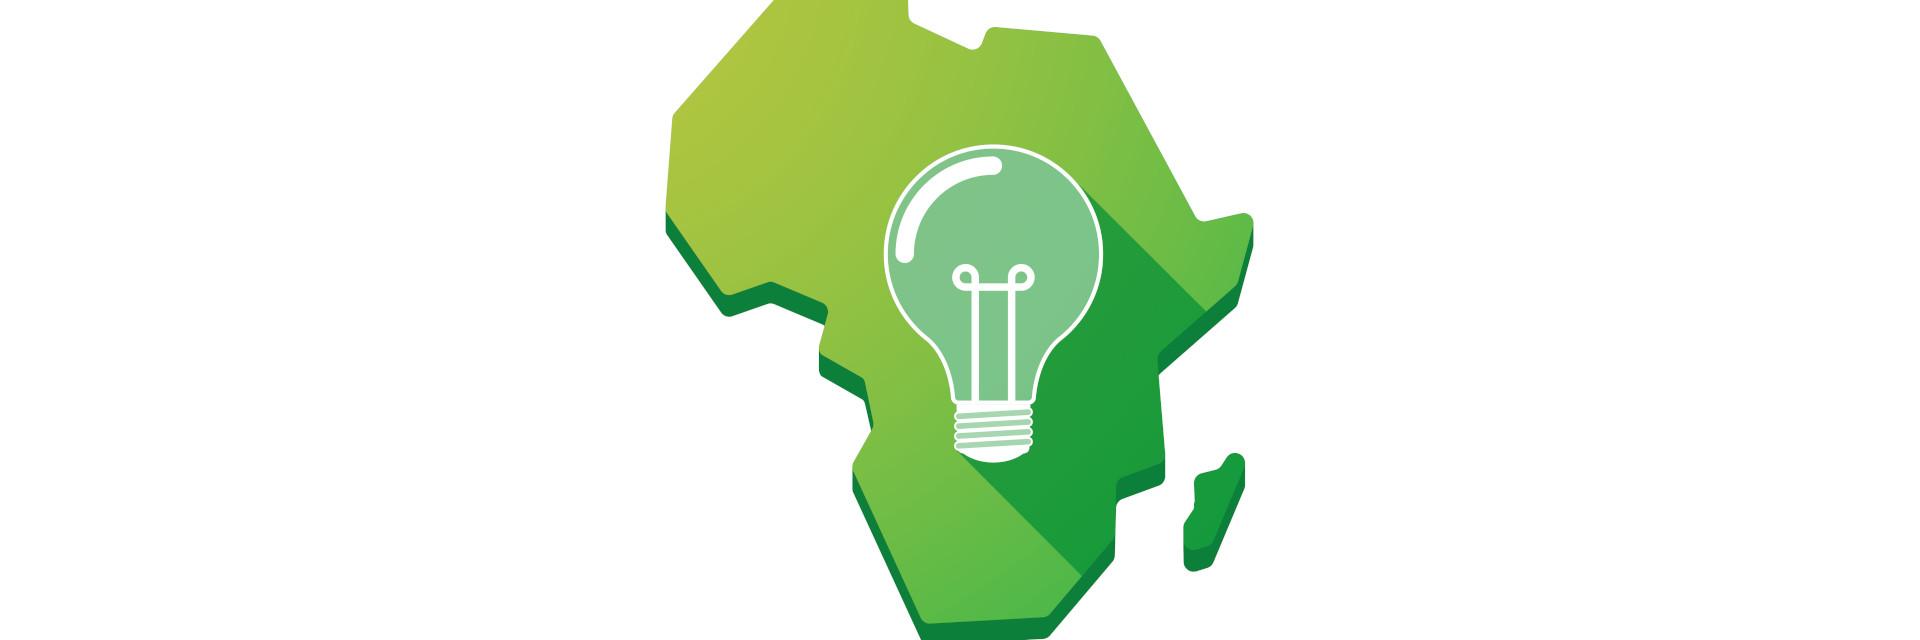 ARFSD2021: Africa can be resilient and green